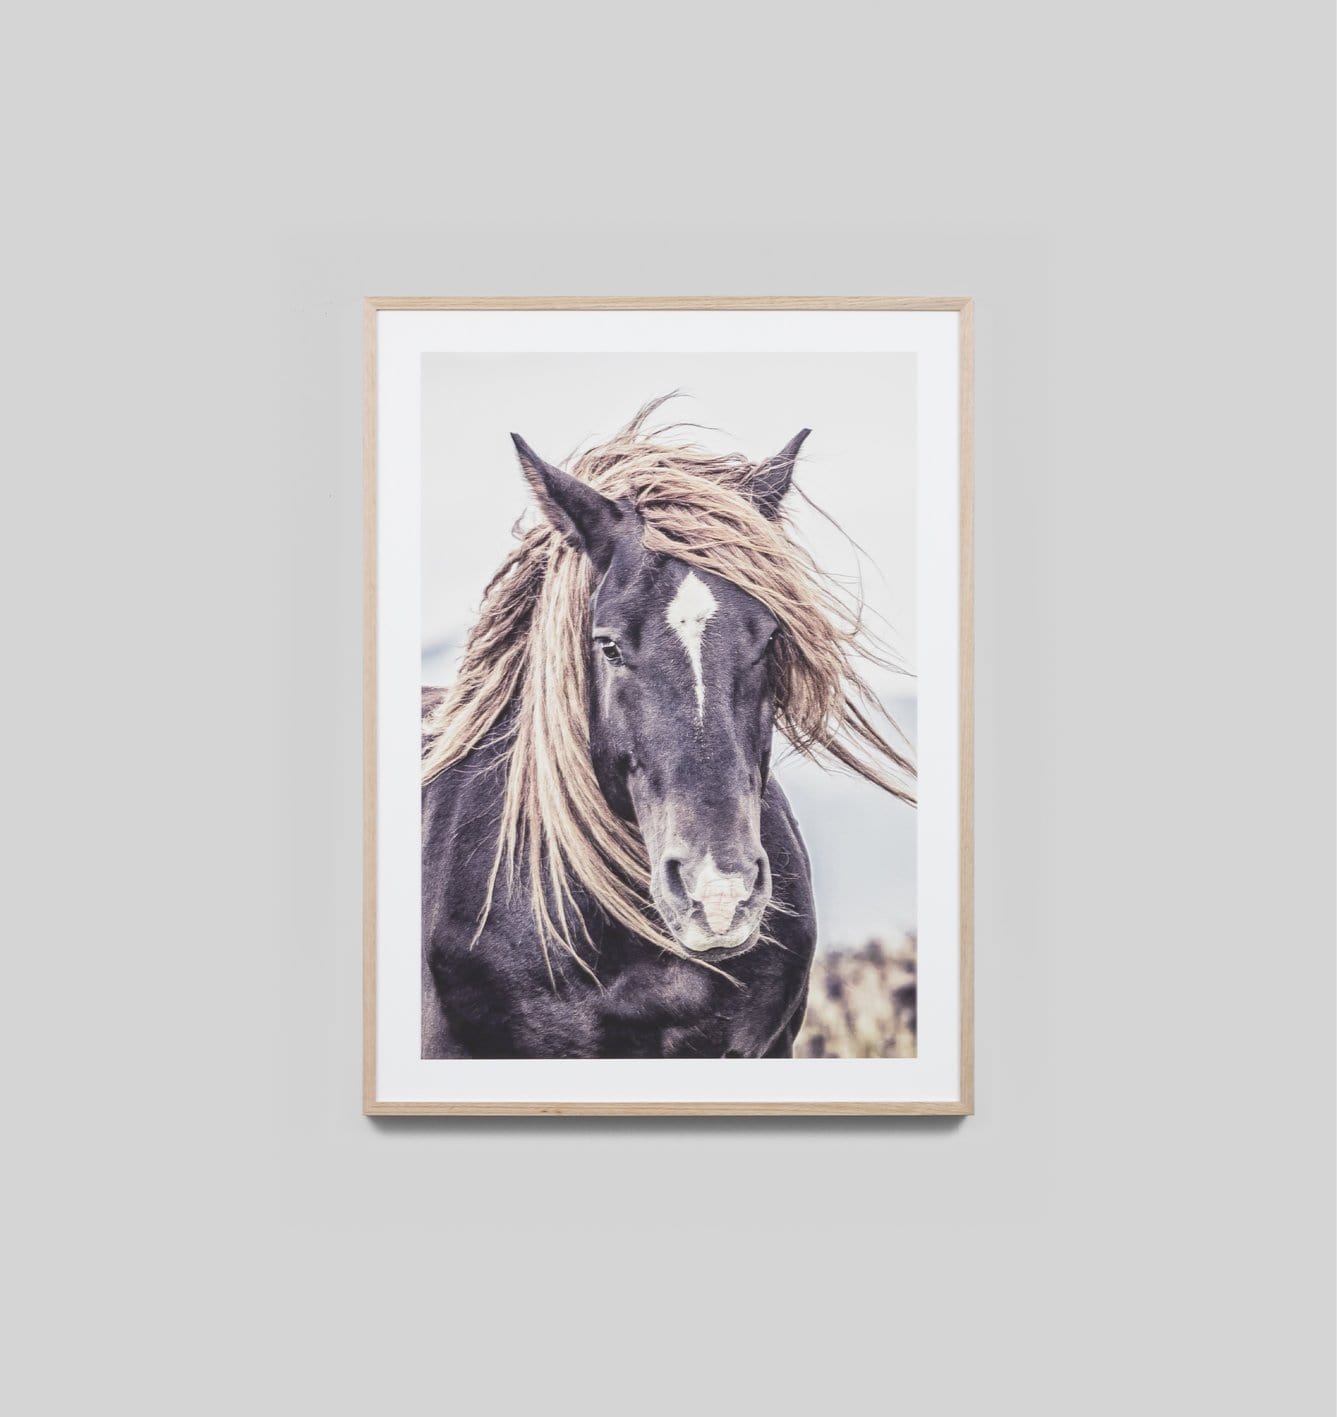 Buy Lone Mustang Print online at - Sofas Direct